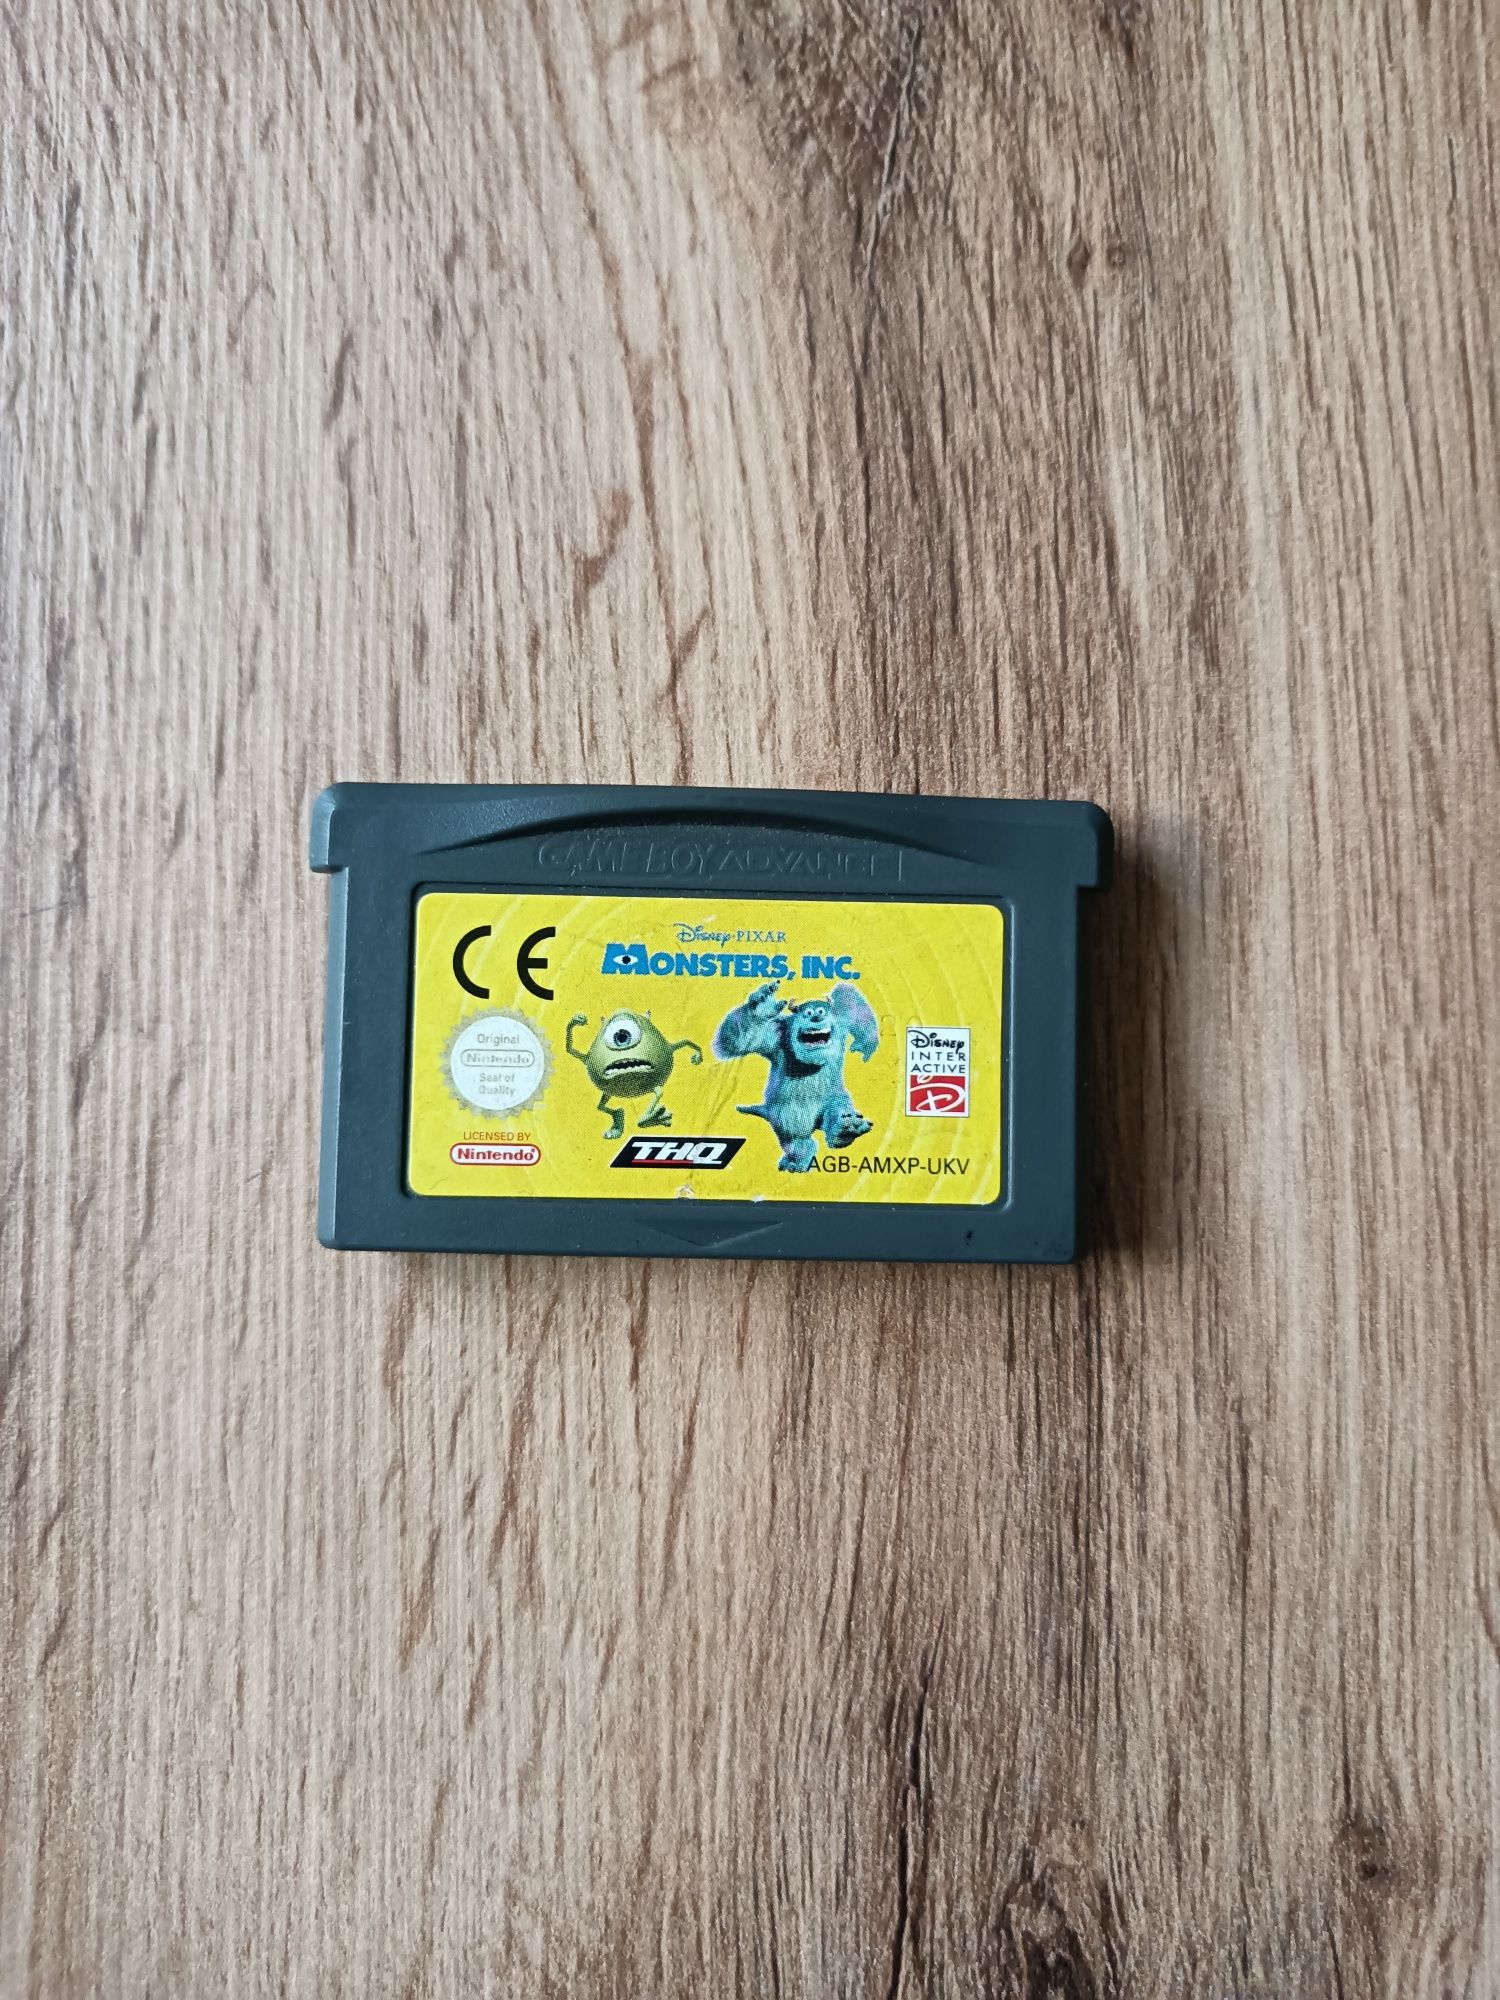 Monsters, INC Gameboy Advance